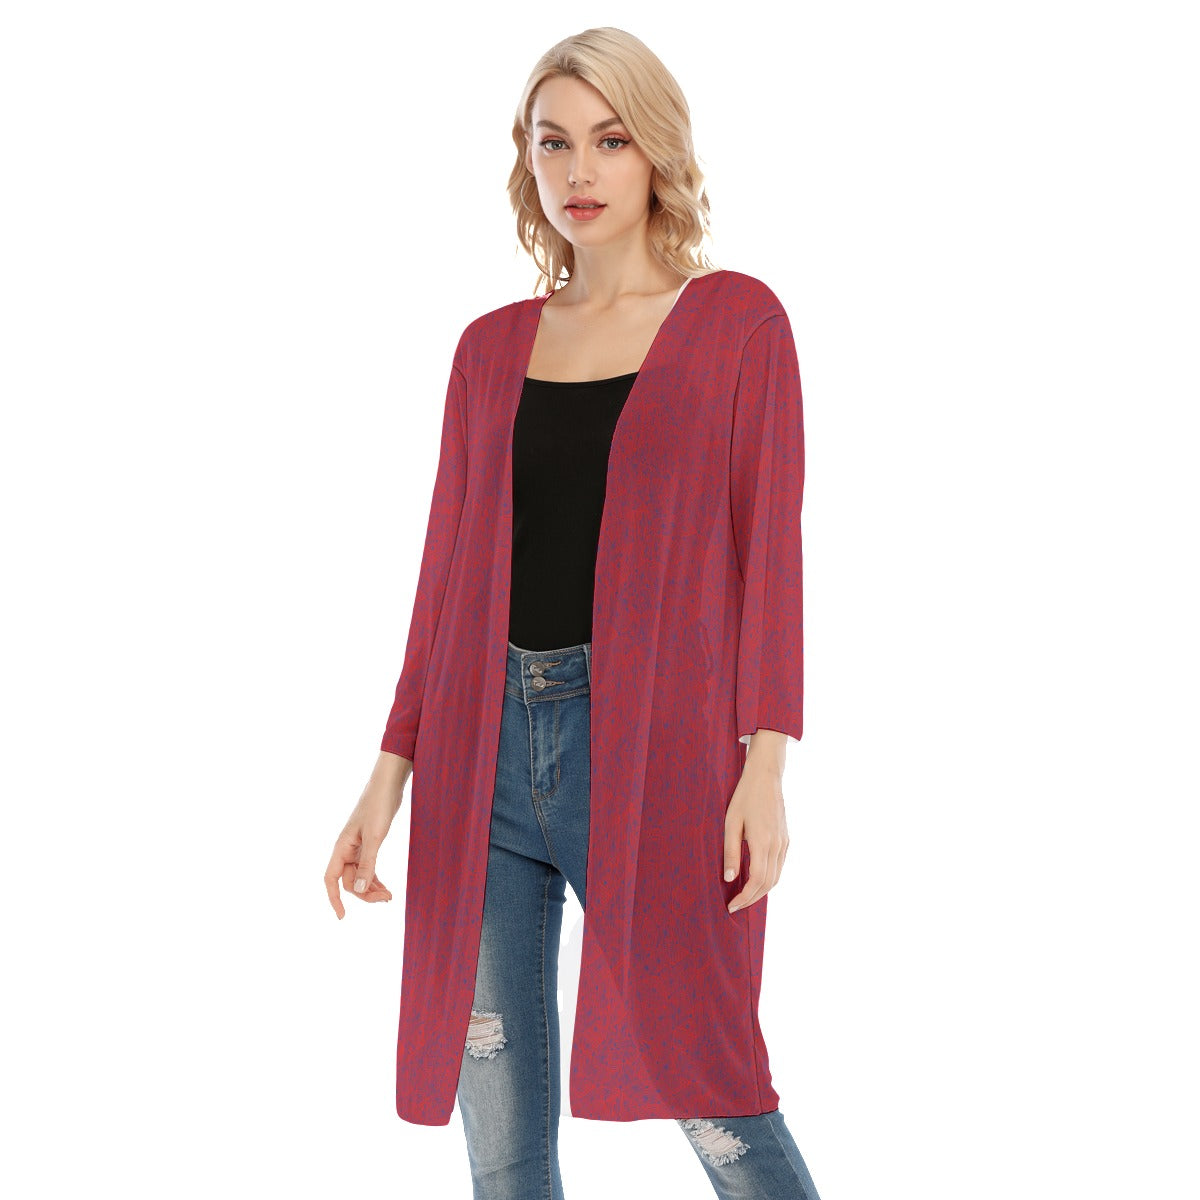 Geometric Red and Blue V-neck Mesh Cardigan. Mesh Tunic. Mesh Kimono. Design hand-painted by the Des